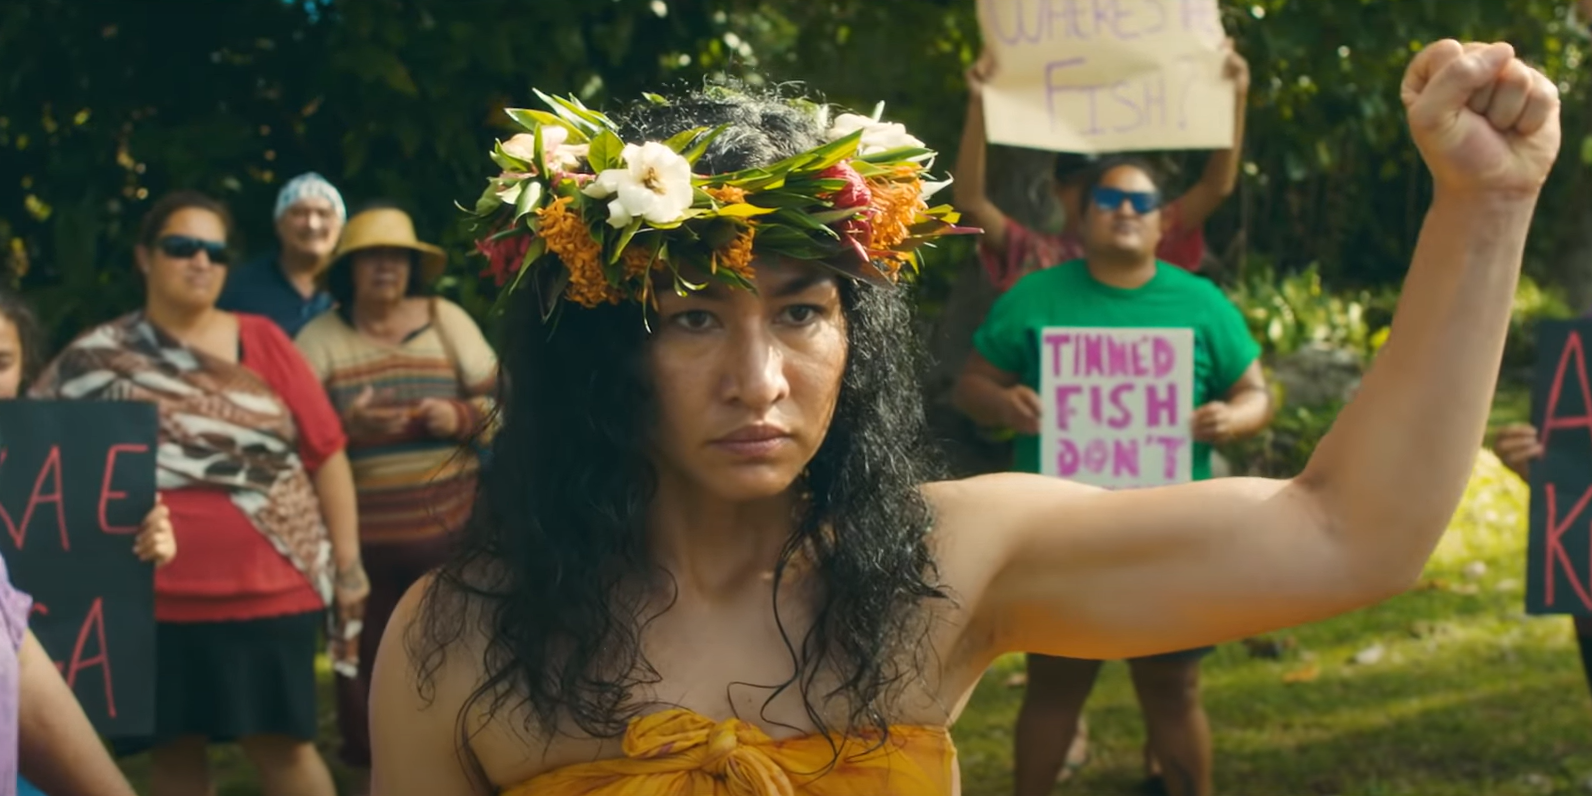 The character Vai from 'Vai' raises her left fist in defiance. She wears a flowered lei on her head.